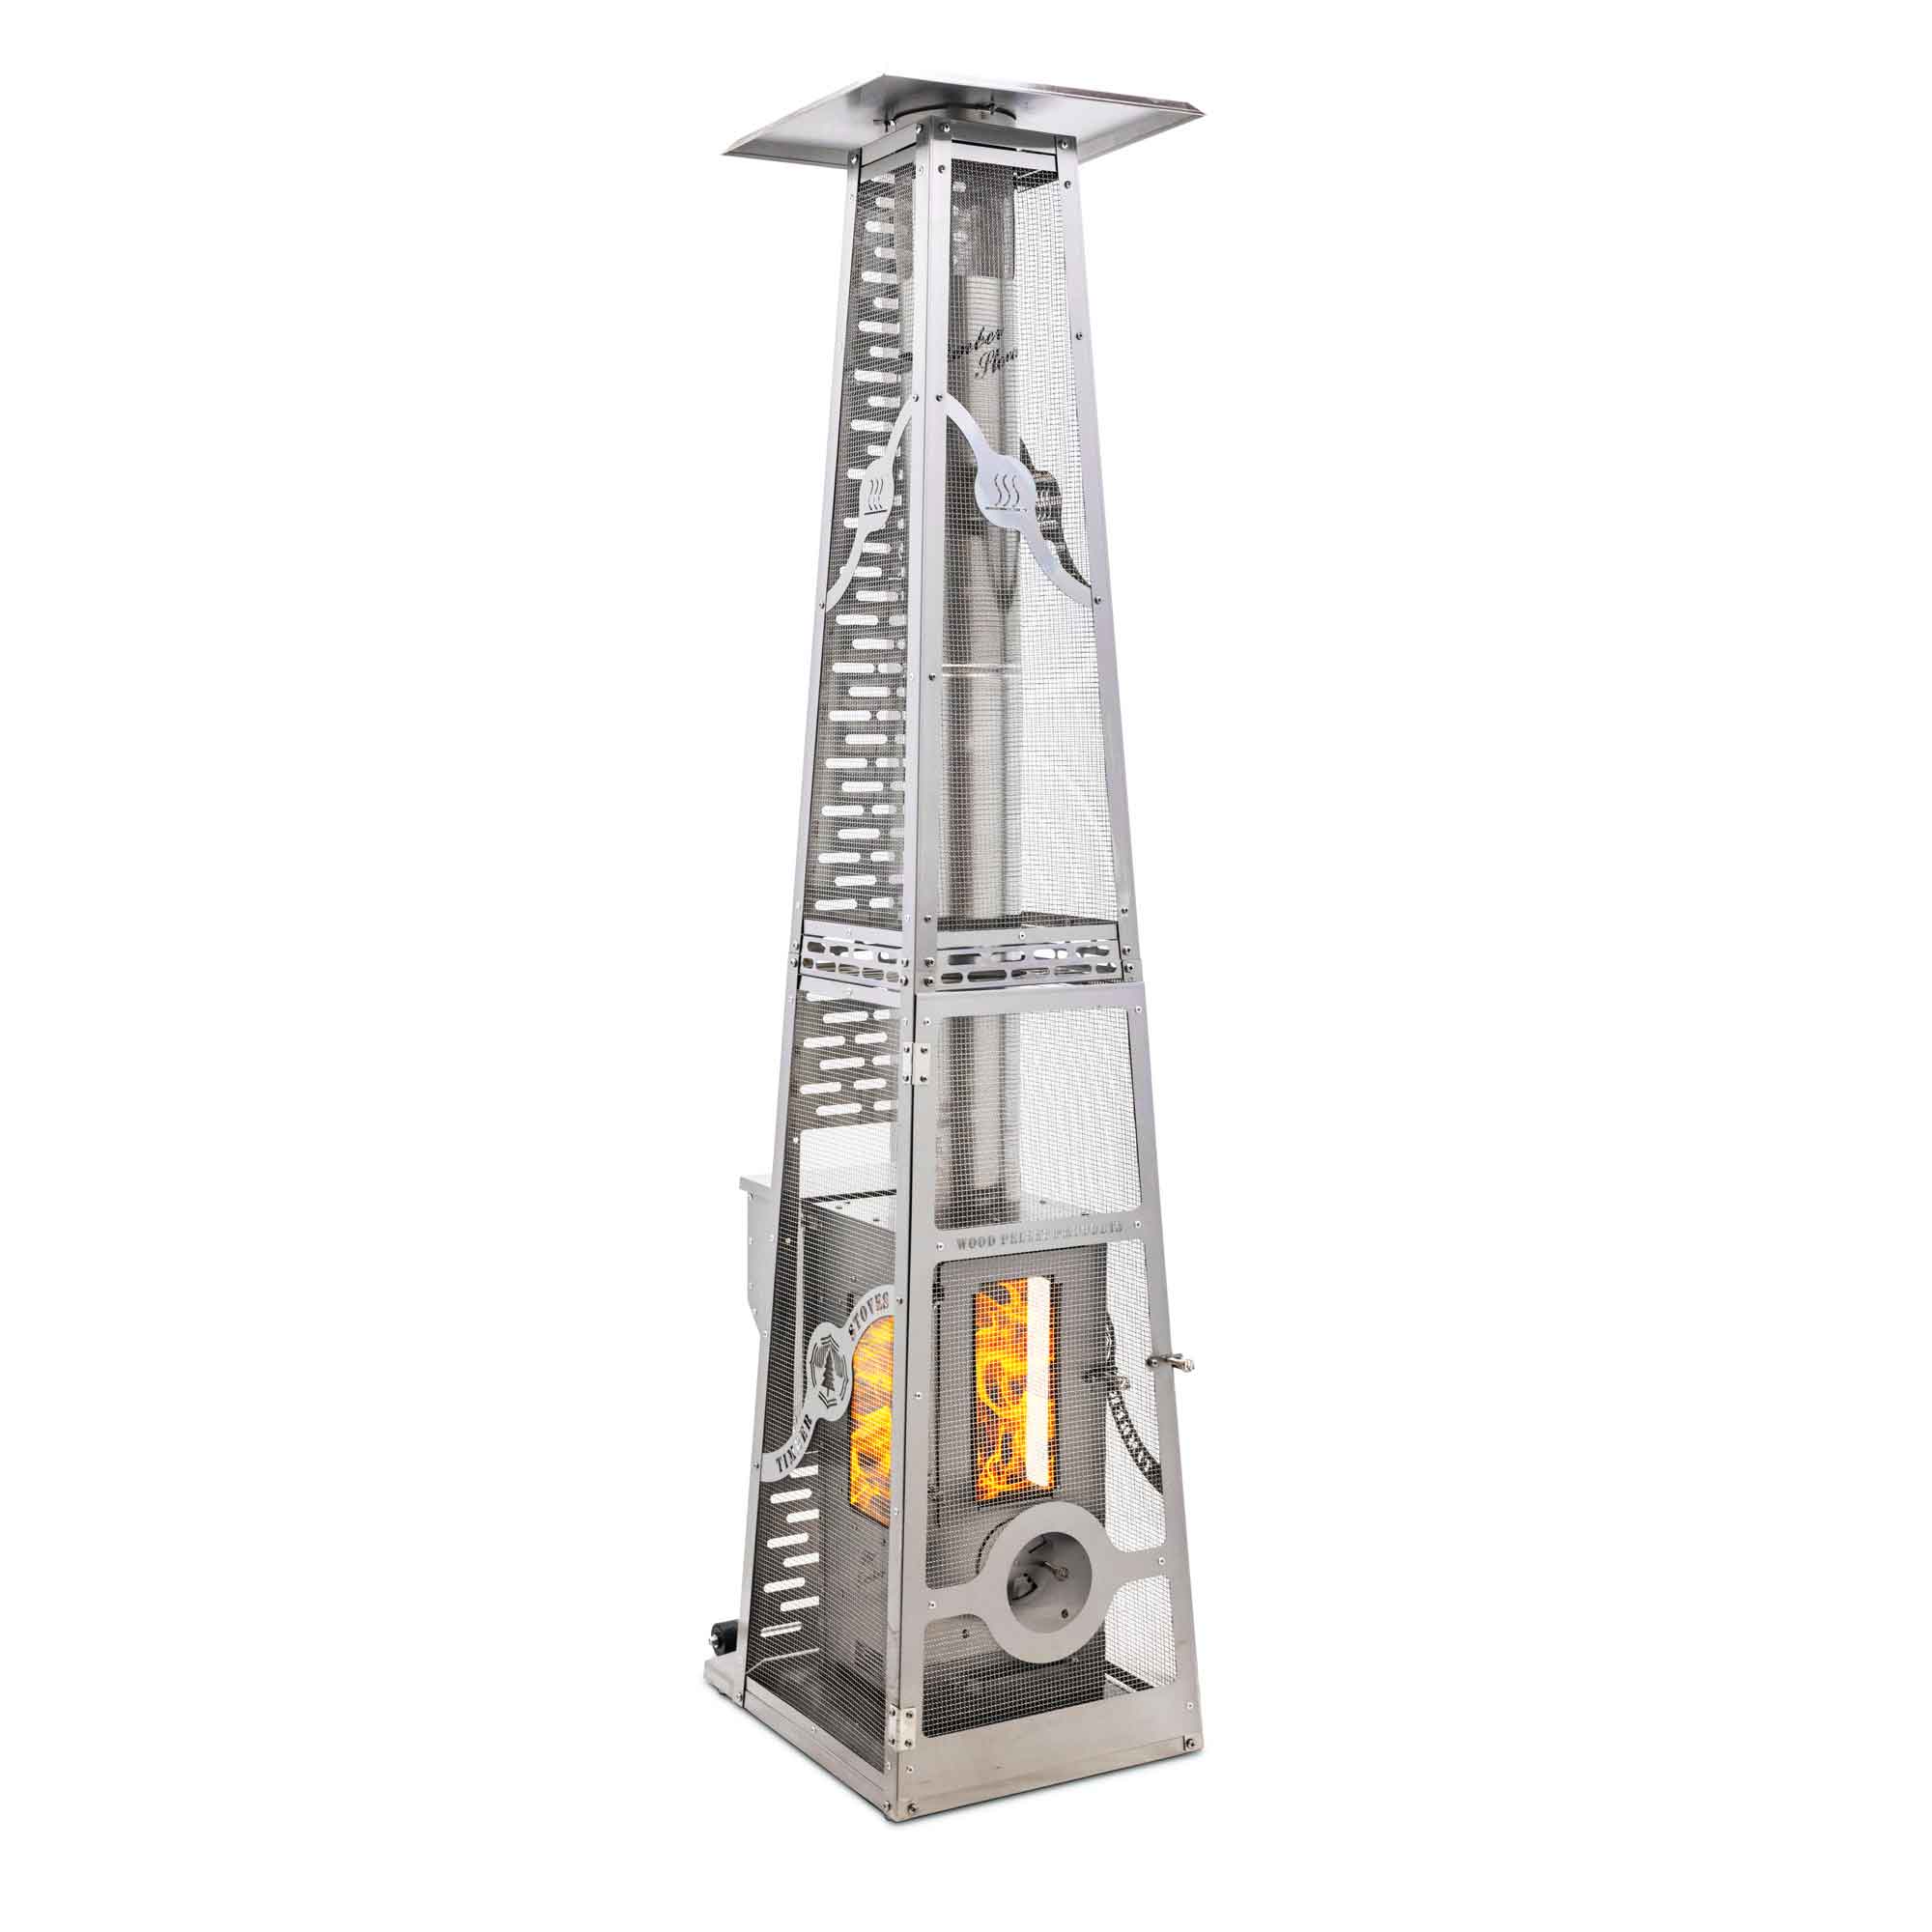 Solo Stove Tower Patio Heater - SSTOWER